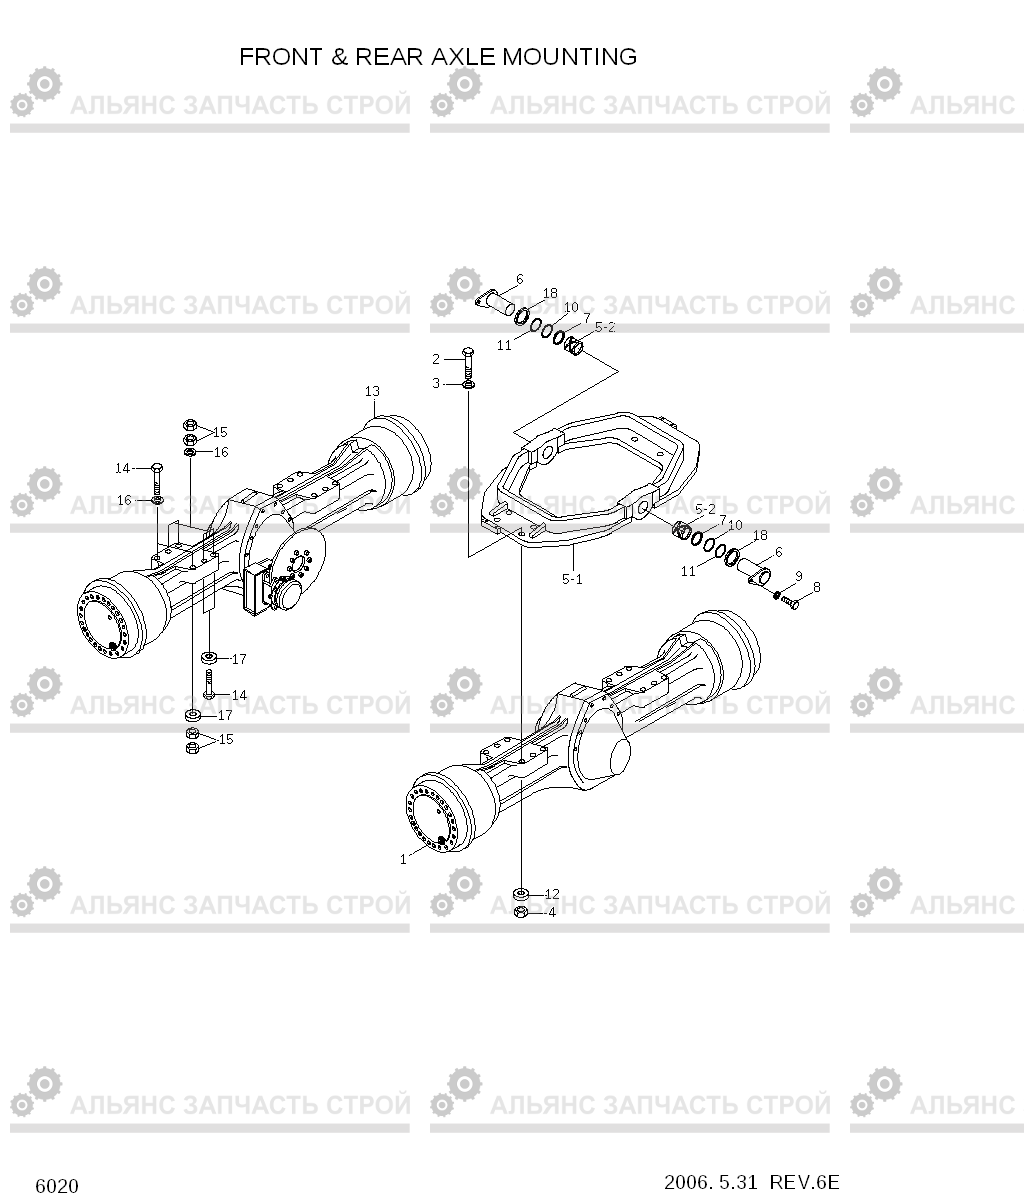 6020 FRONT & REAR AXLE MOUNTING HL780-3A, Hyundai